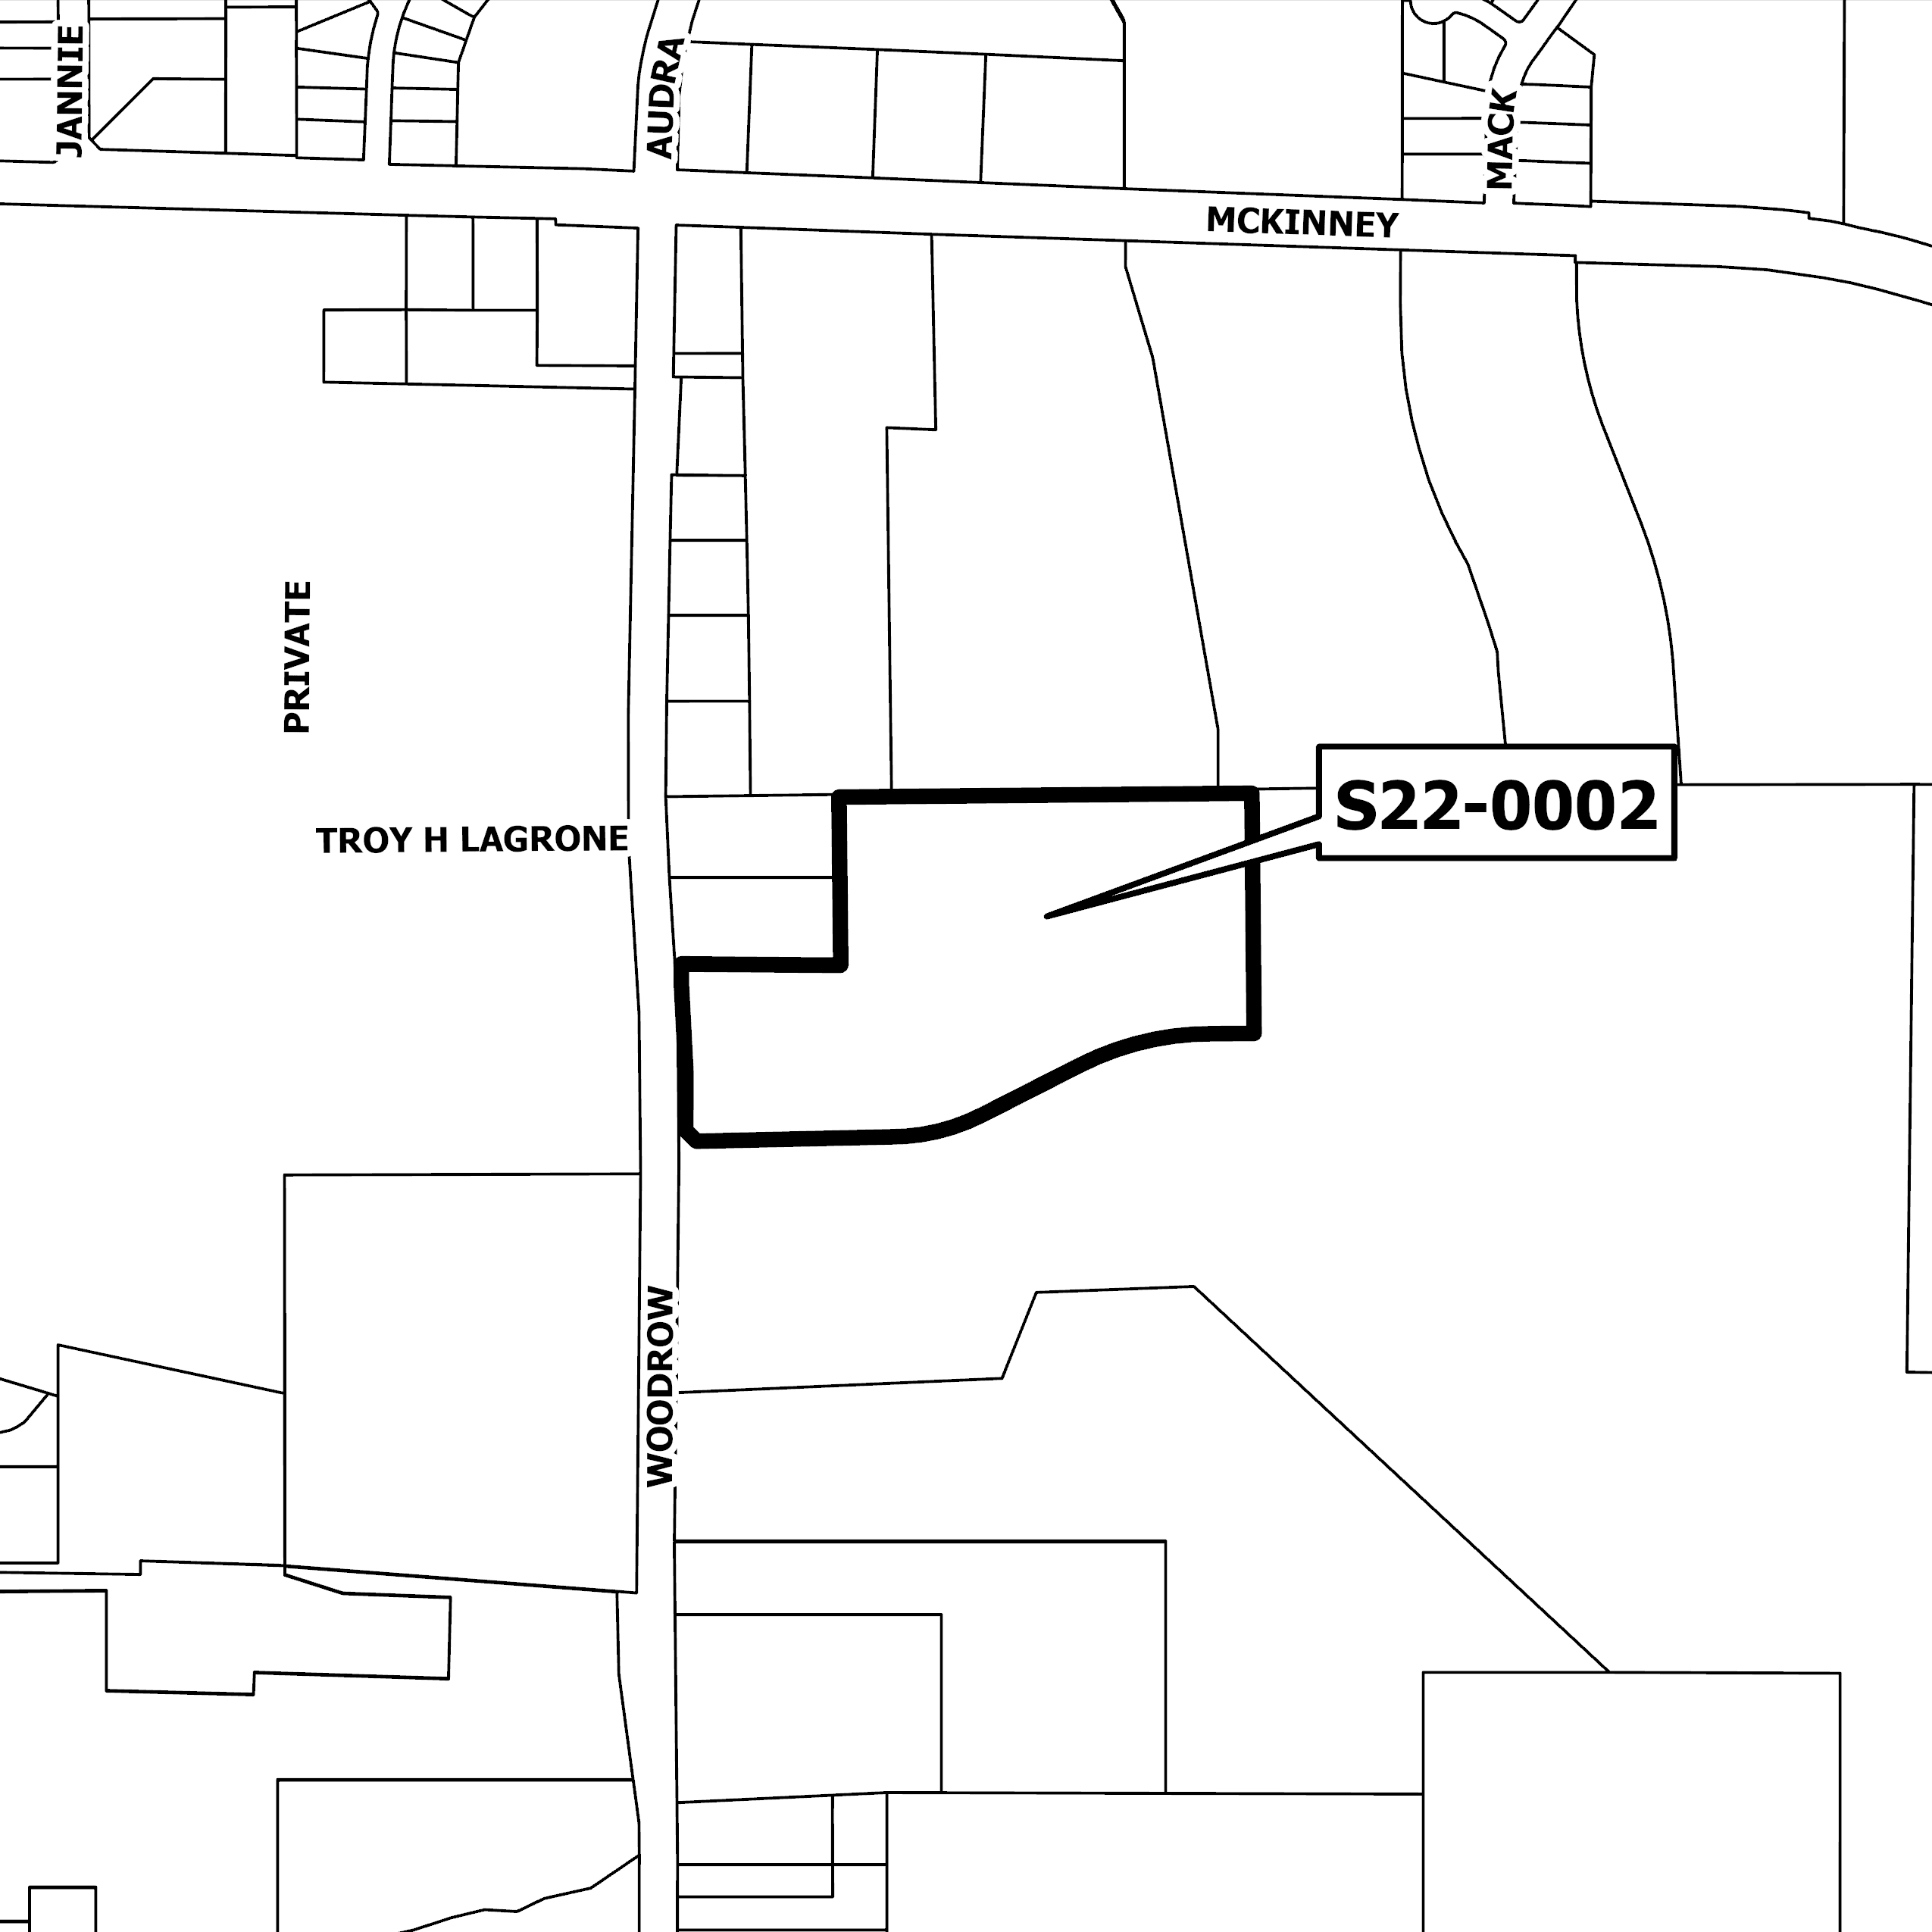 S22-0002 Location Map